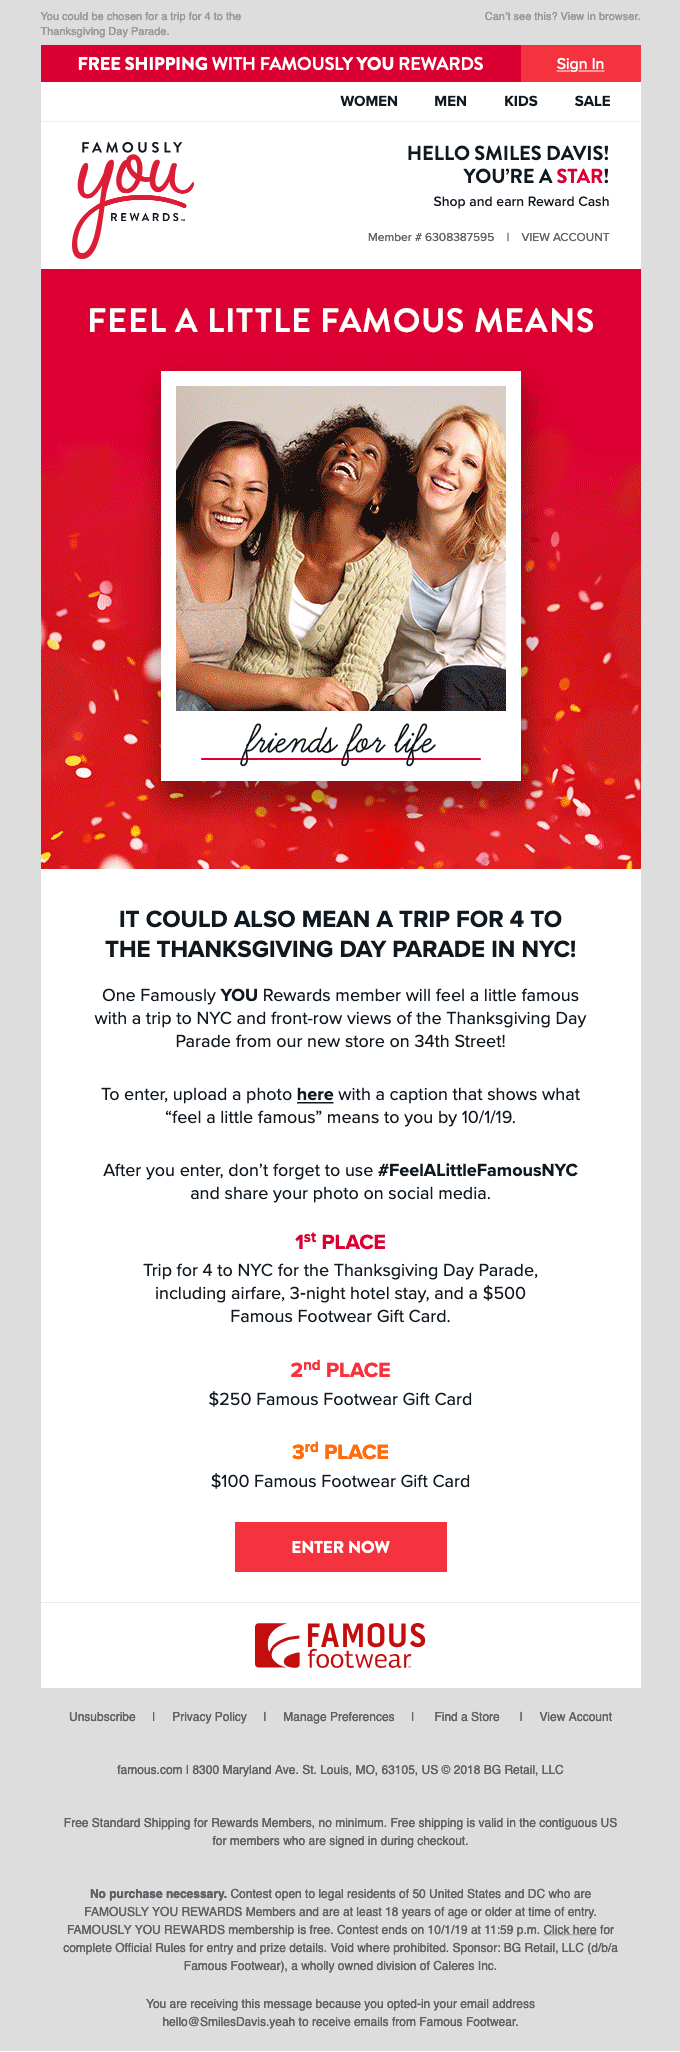 Rewards Member Exclusive! Enter for a trip to NYC